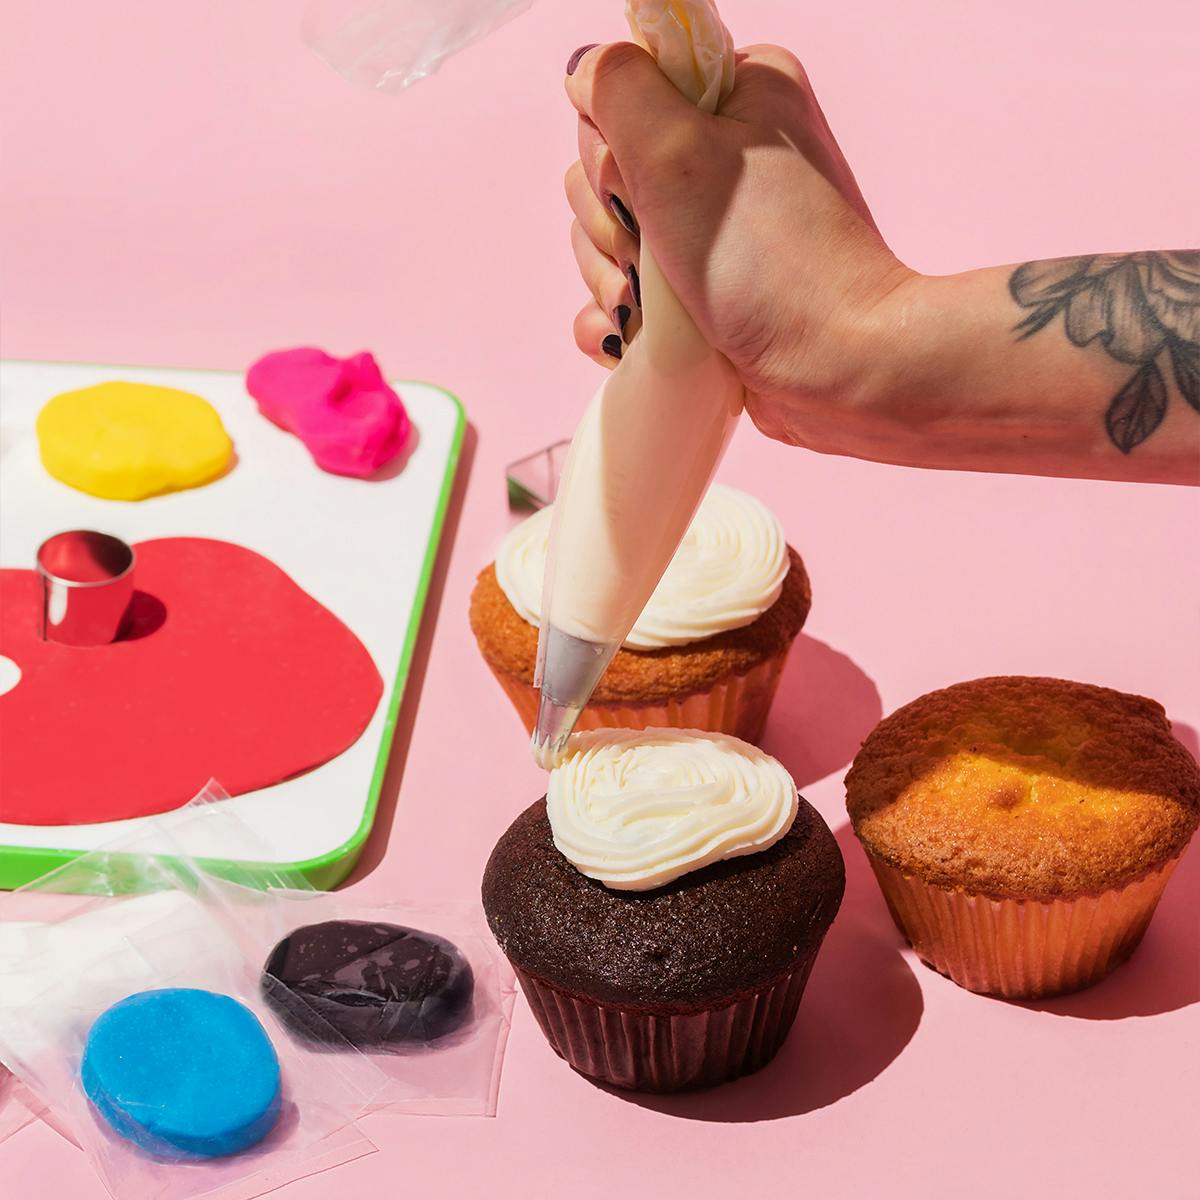 Duff Monster Cupcakes Baking Kit - Duff Goldman x Baketivity Kits for Kids,  Teens & Adults with Pre-Measured Ingredients & Kid-Friendly Instructions 